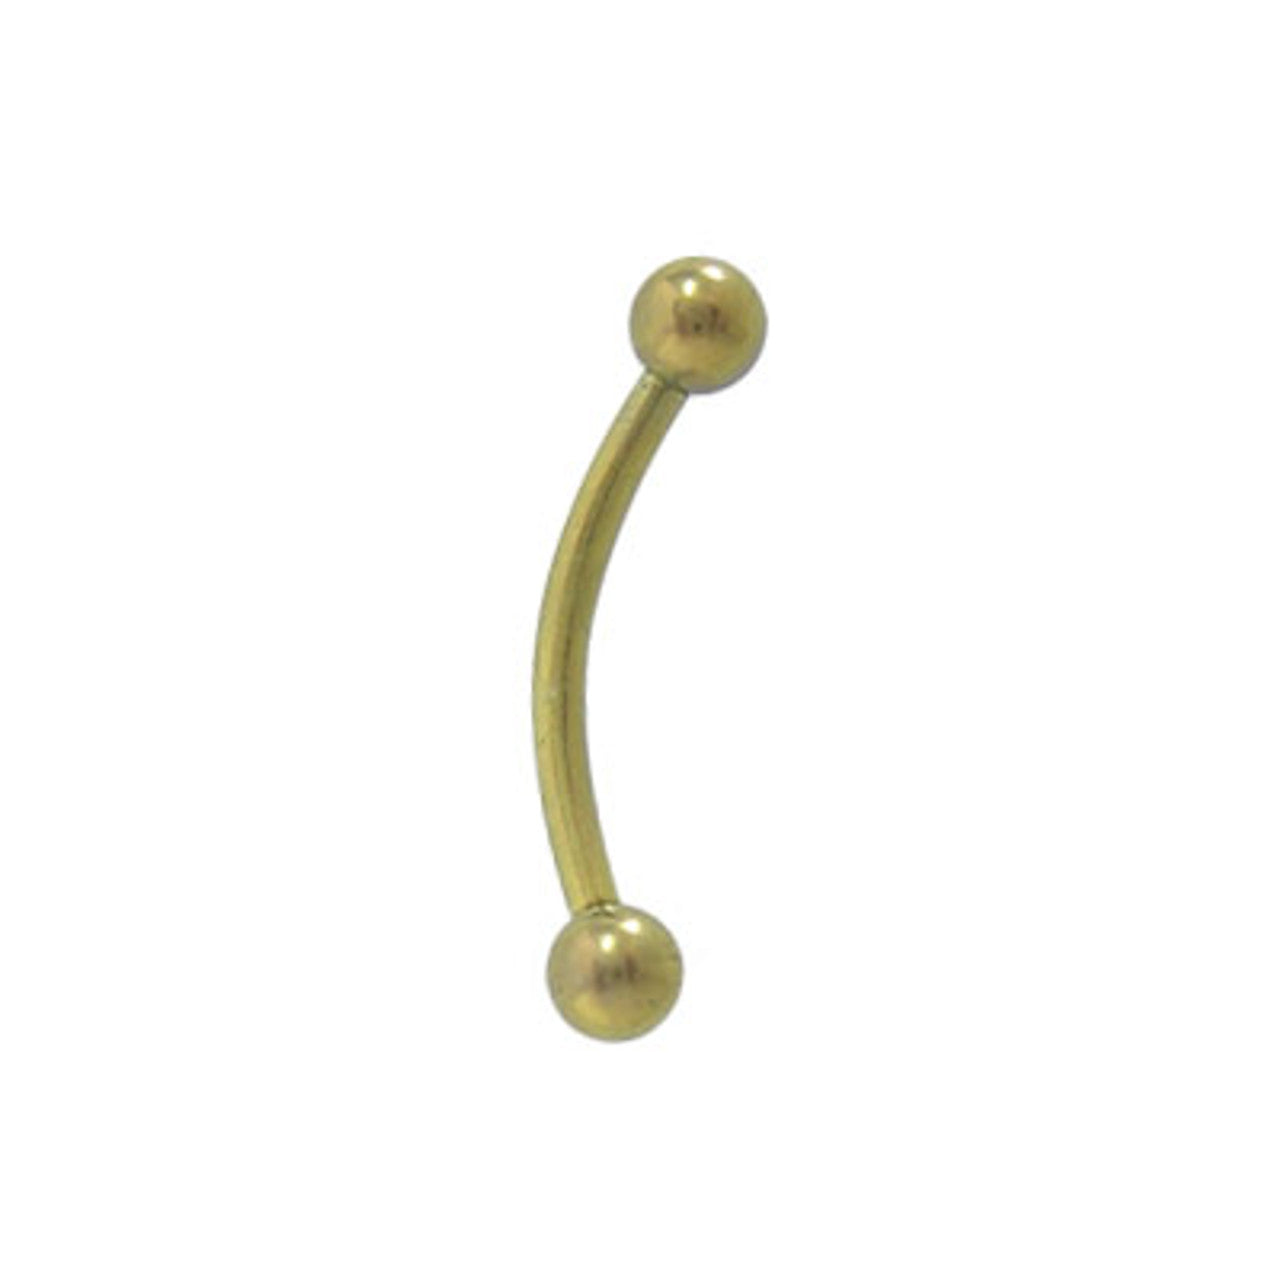 Titanium Curved Barbell Eyebrow Ring 16 Gauge With Ball